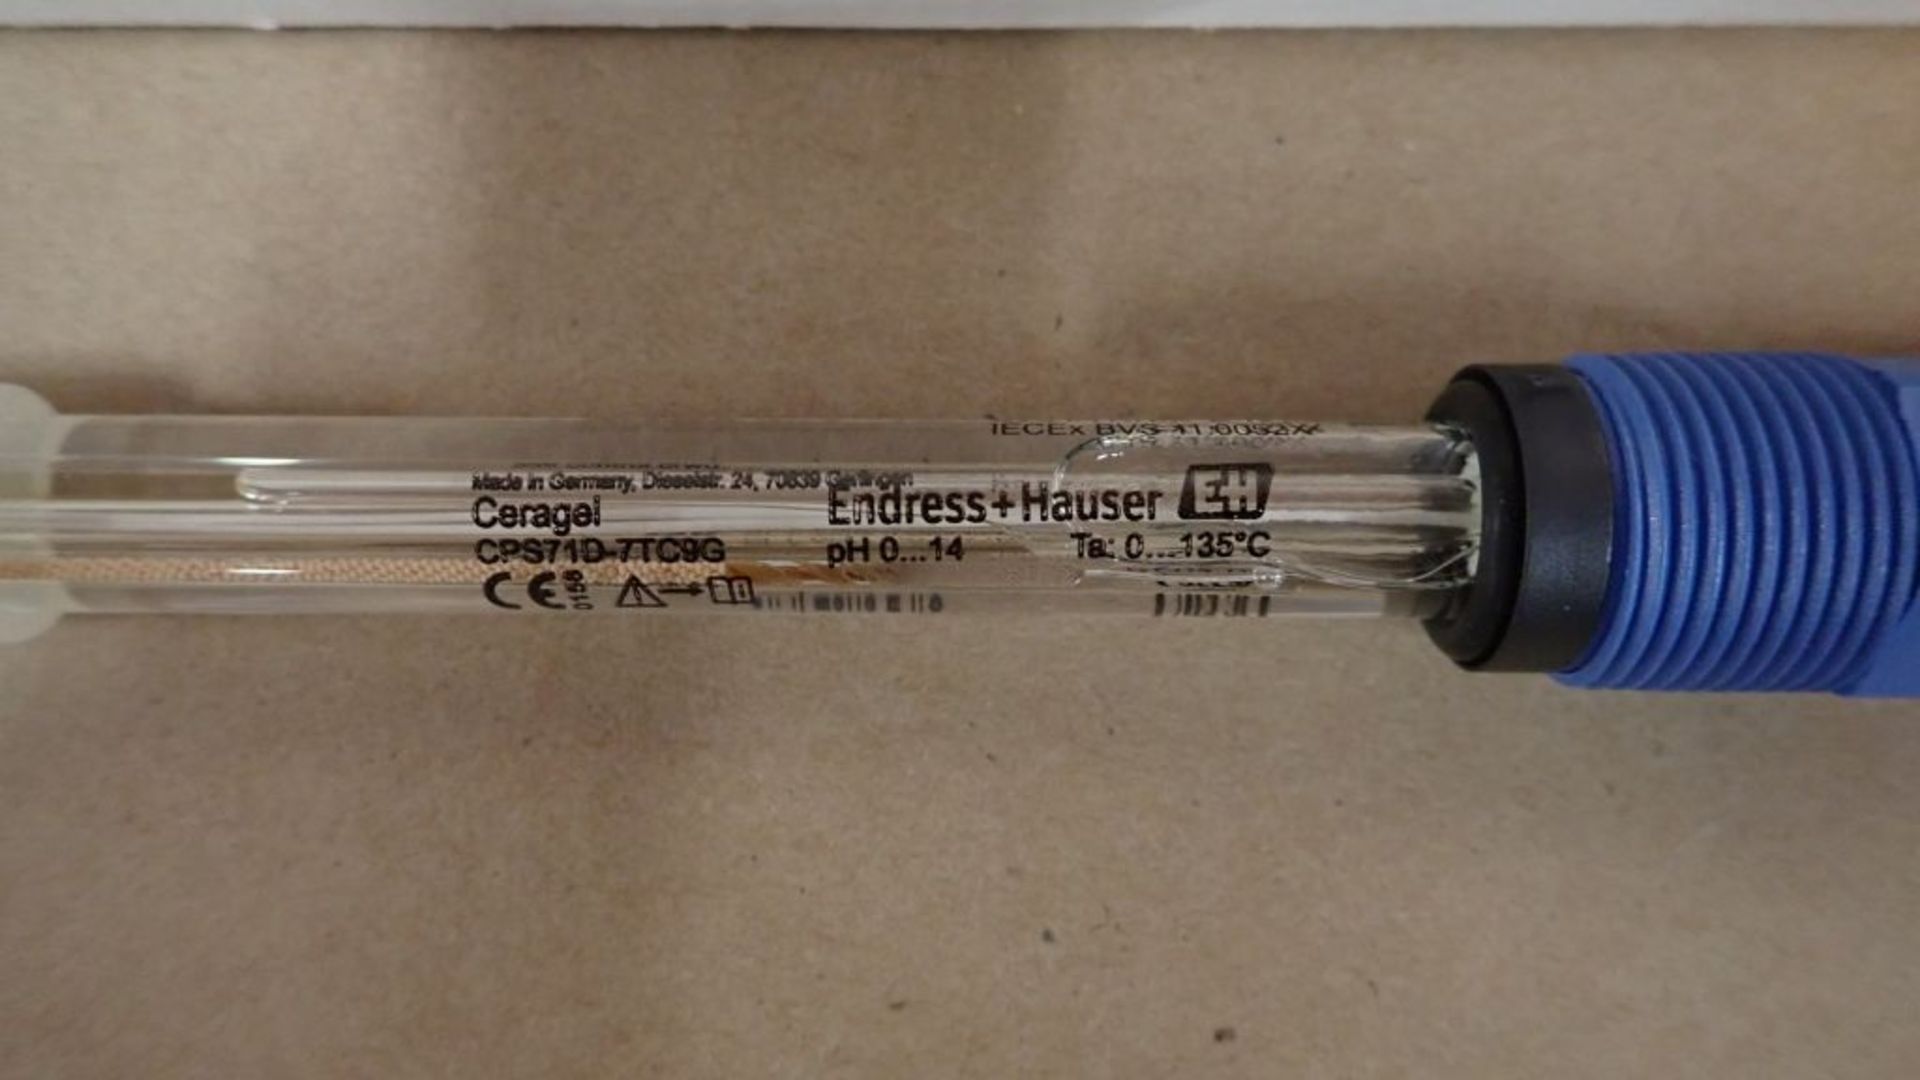 Lot of Assorted Endress & Hauser Sensors for Liquid Analysis | Serial No's. Include: N331A905E00; - Image 9 of 9